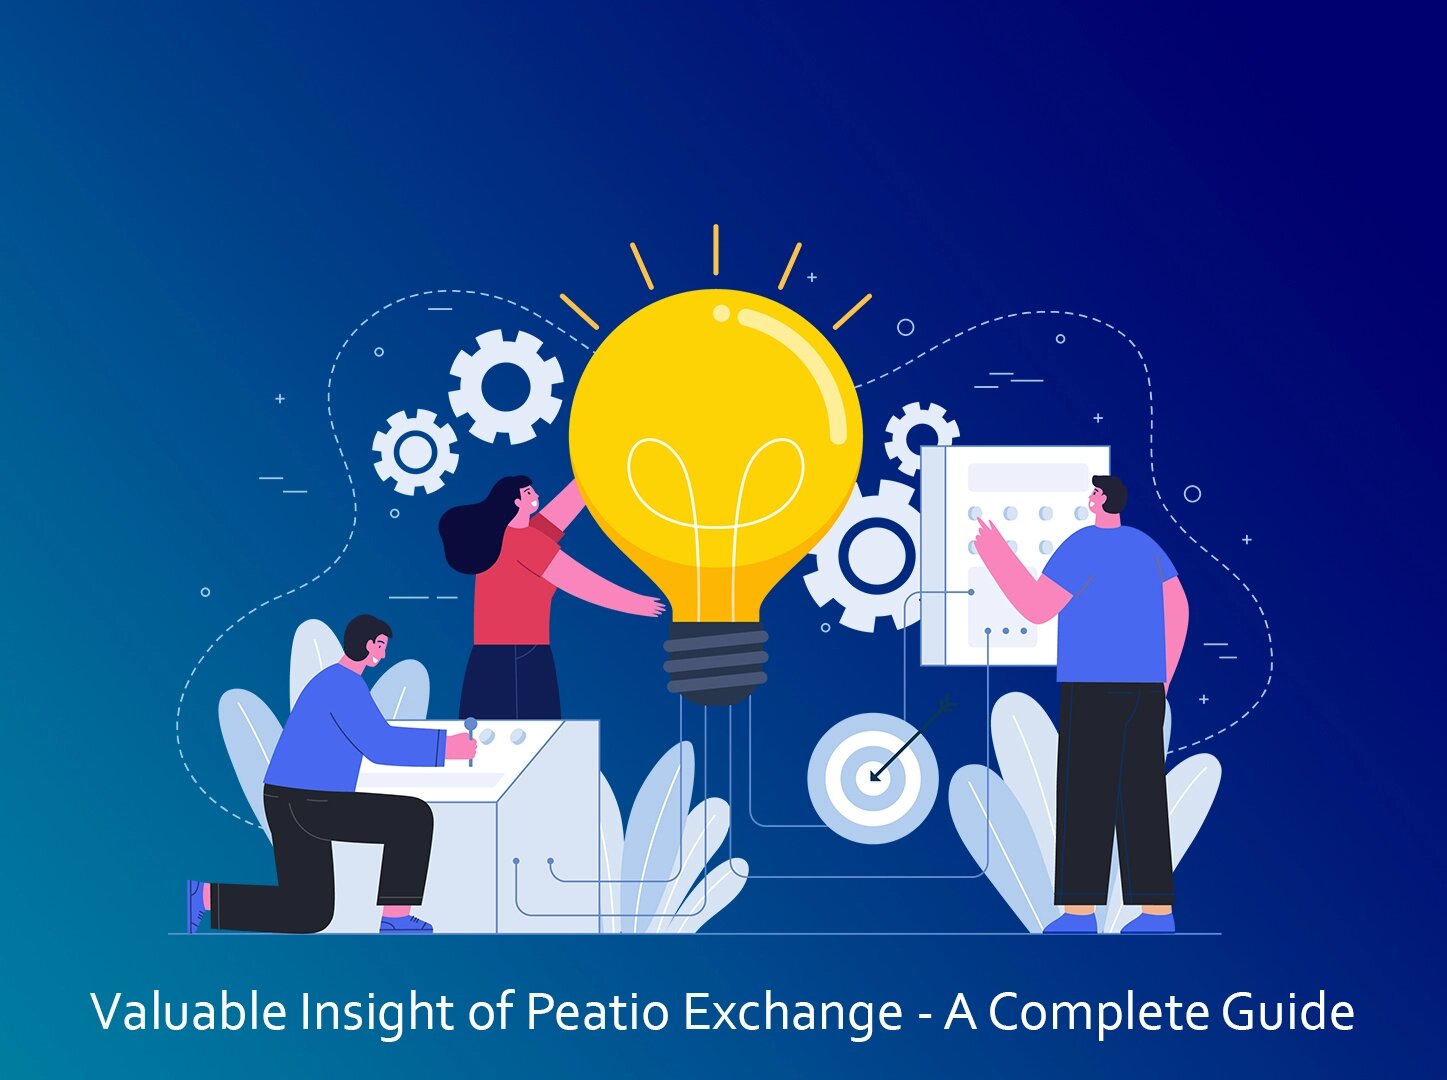 Peatio is a free and open-source crypto-currency exchange built with the Rails framework. Read this article to get Valuable Insights on Peatio Exchange: https://www.w3villa.com/blog/Valuable-Insights-on-Peatio-Exchange-A-Complete-Guide